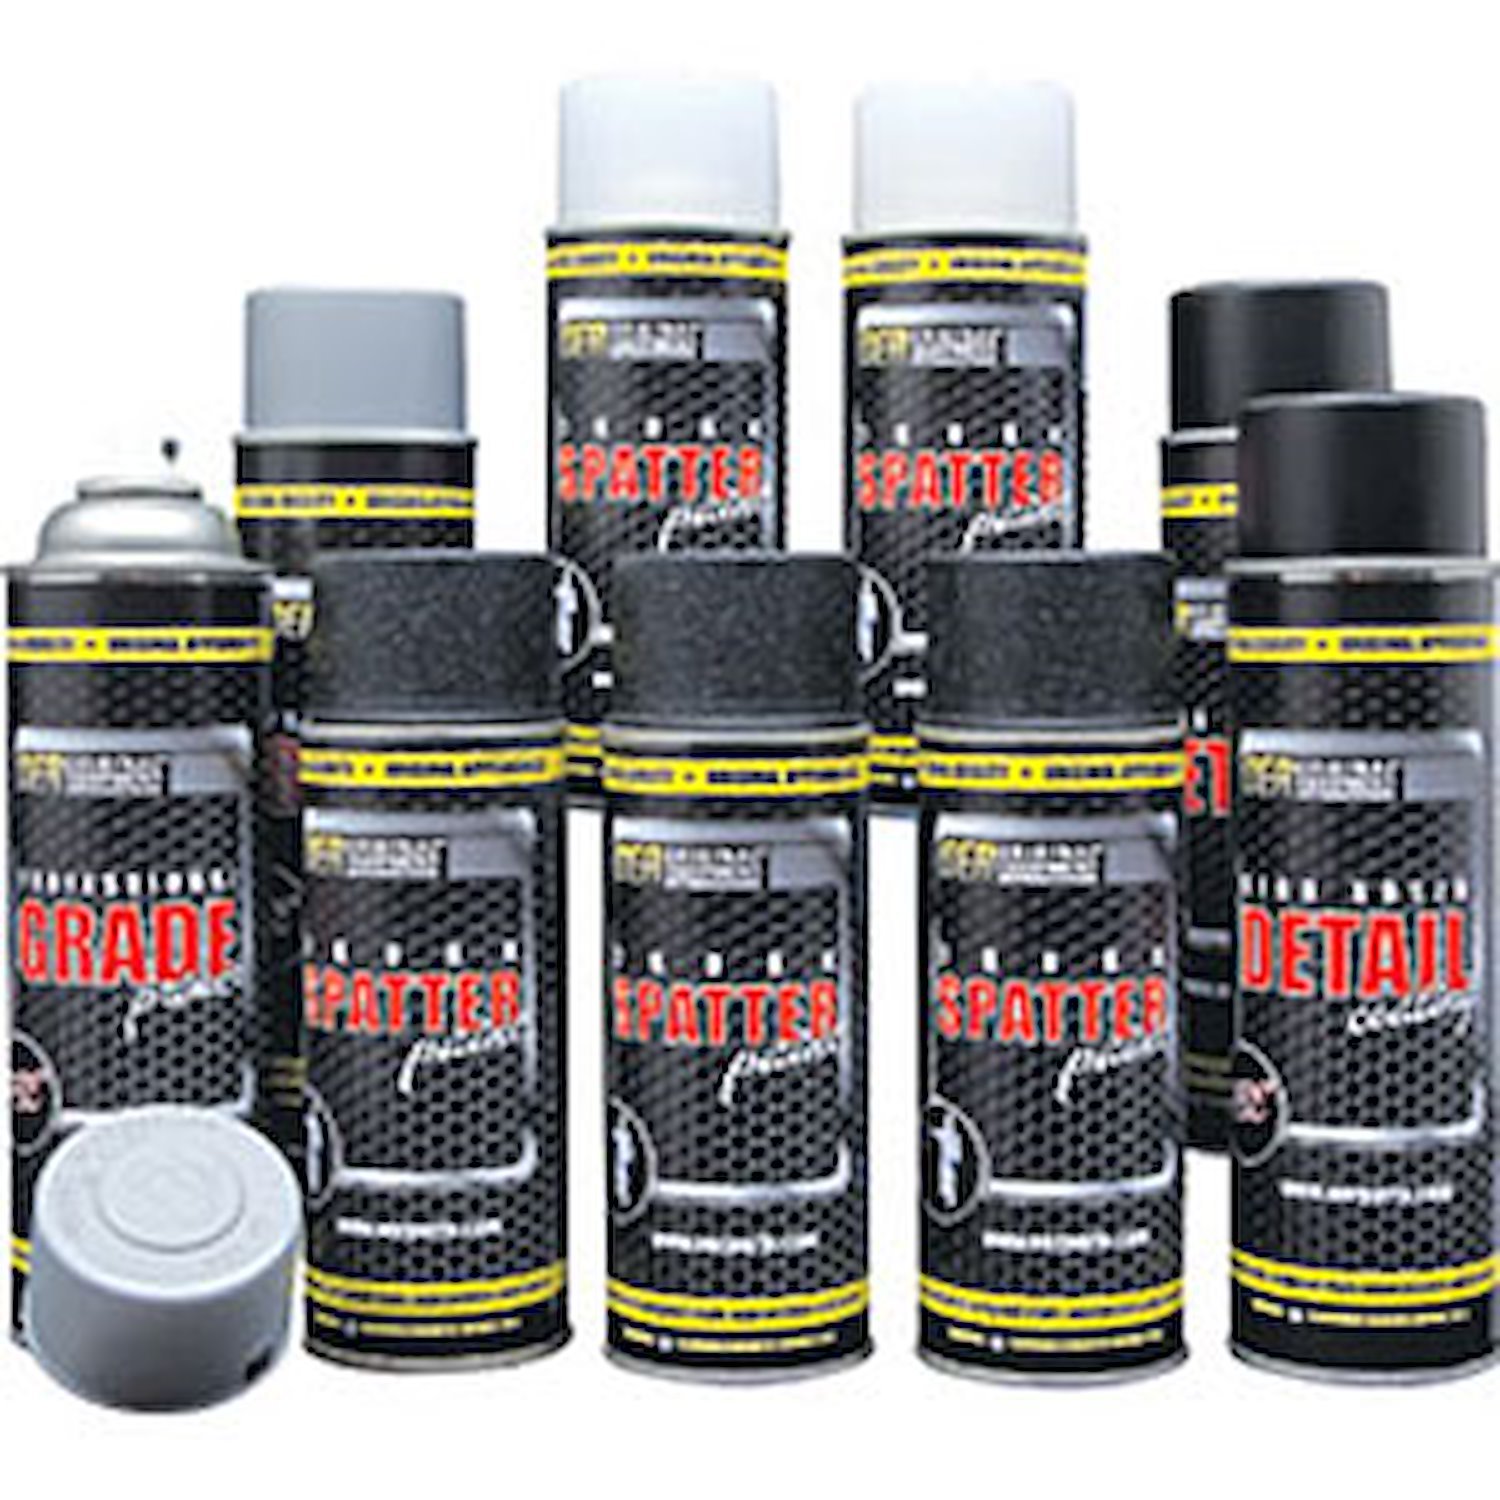 K51493 Trunk Refinishing Kit With Self-Etching Gray Primer OER Black and Gray